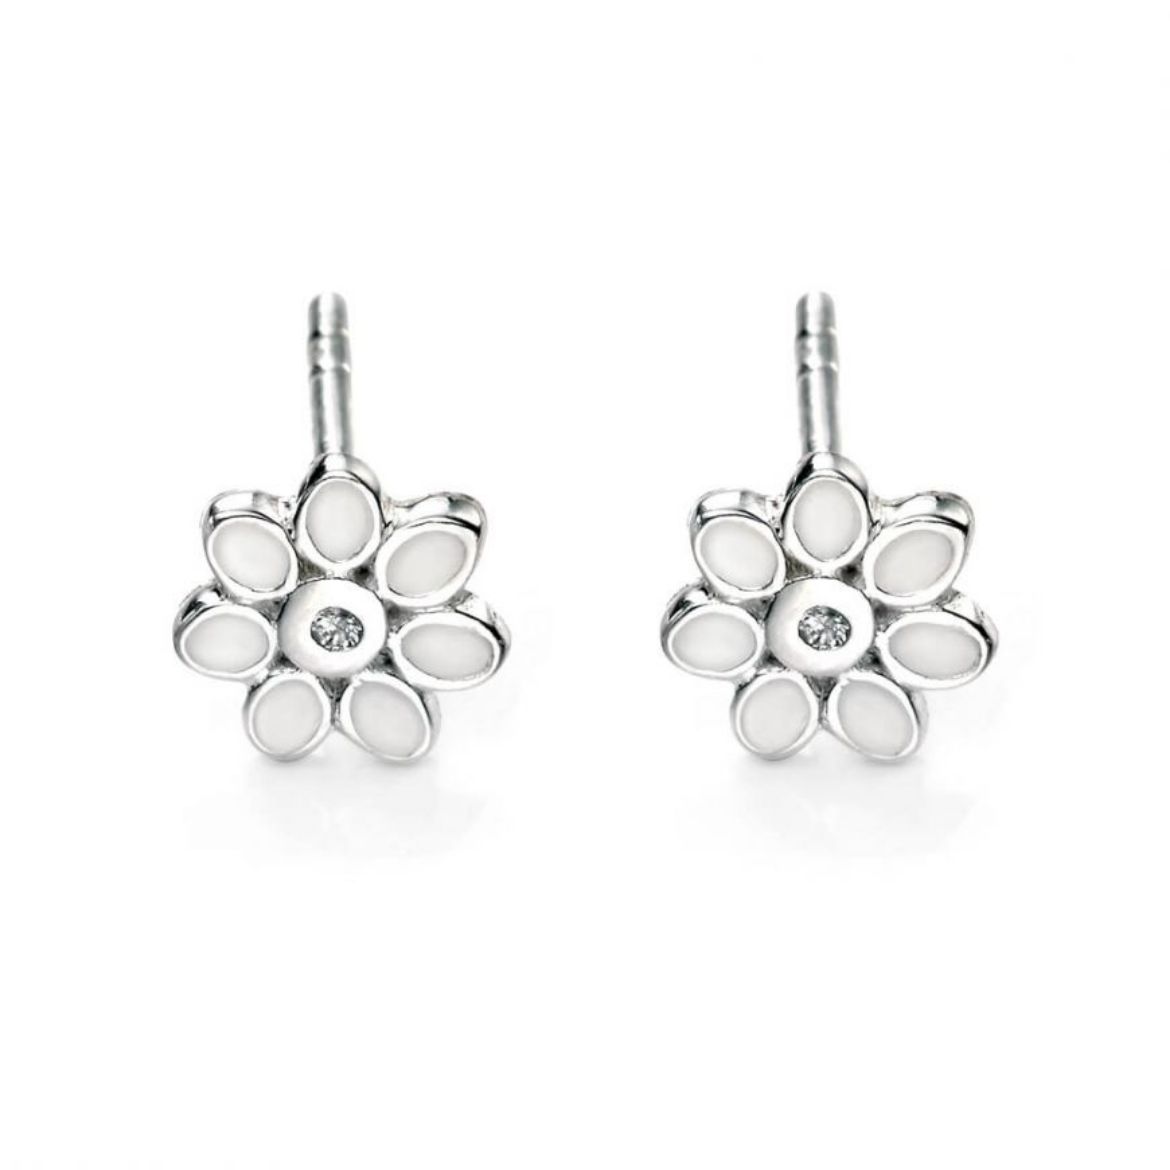 Picture of White Enamel Daisy Stud Earrings with Diamond